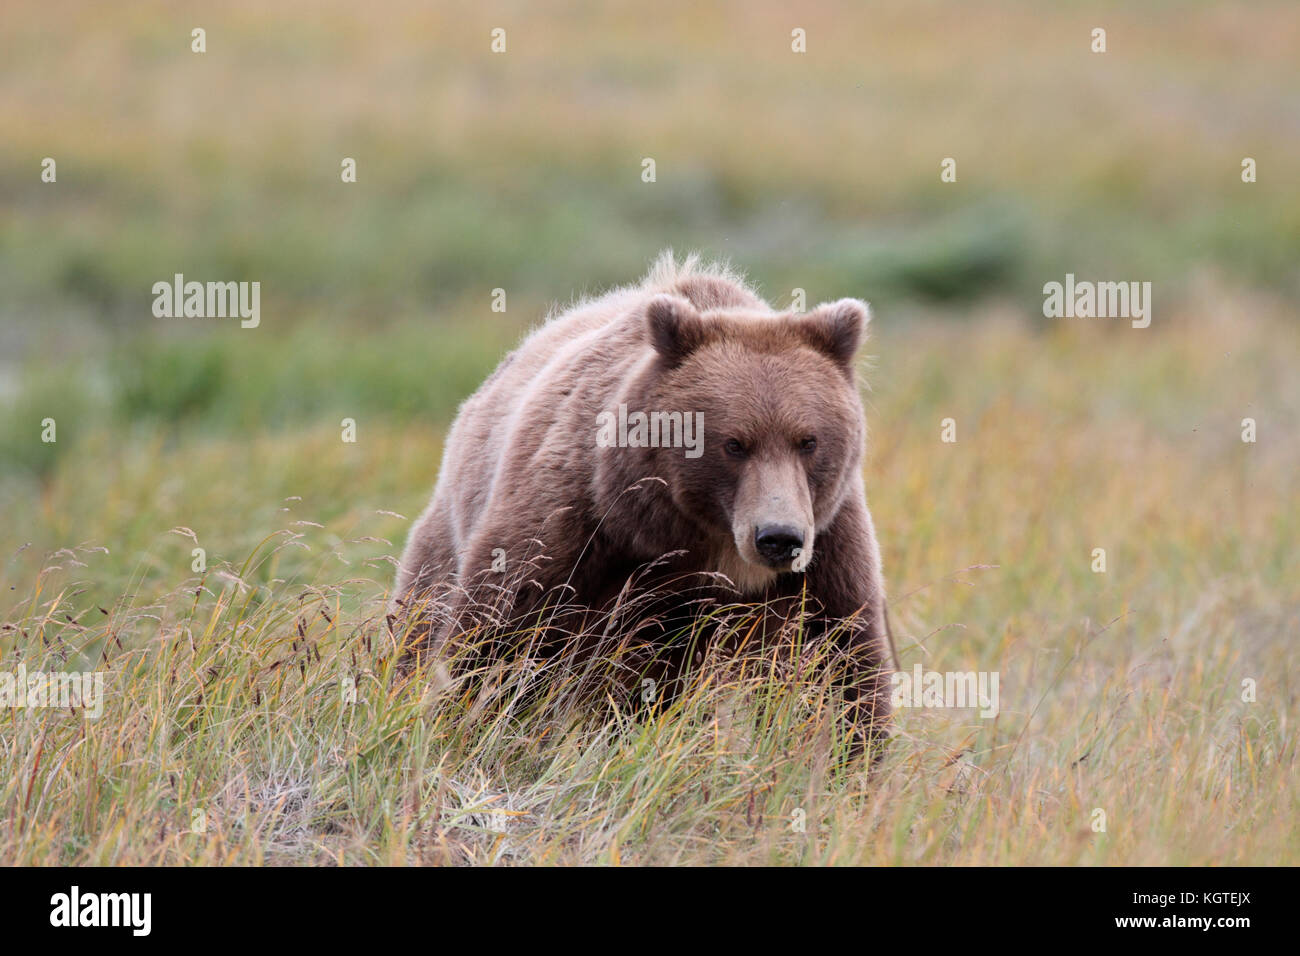 An Alaska Brown Bear, or grizzly, walks dominantly through the gold and green grass of the Alaska Peninsula. Stock Photo